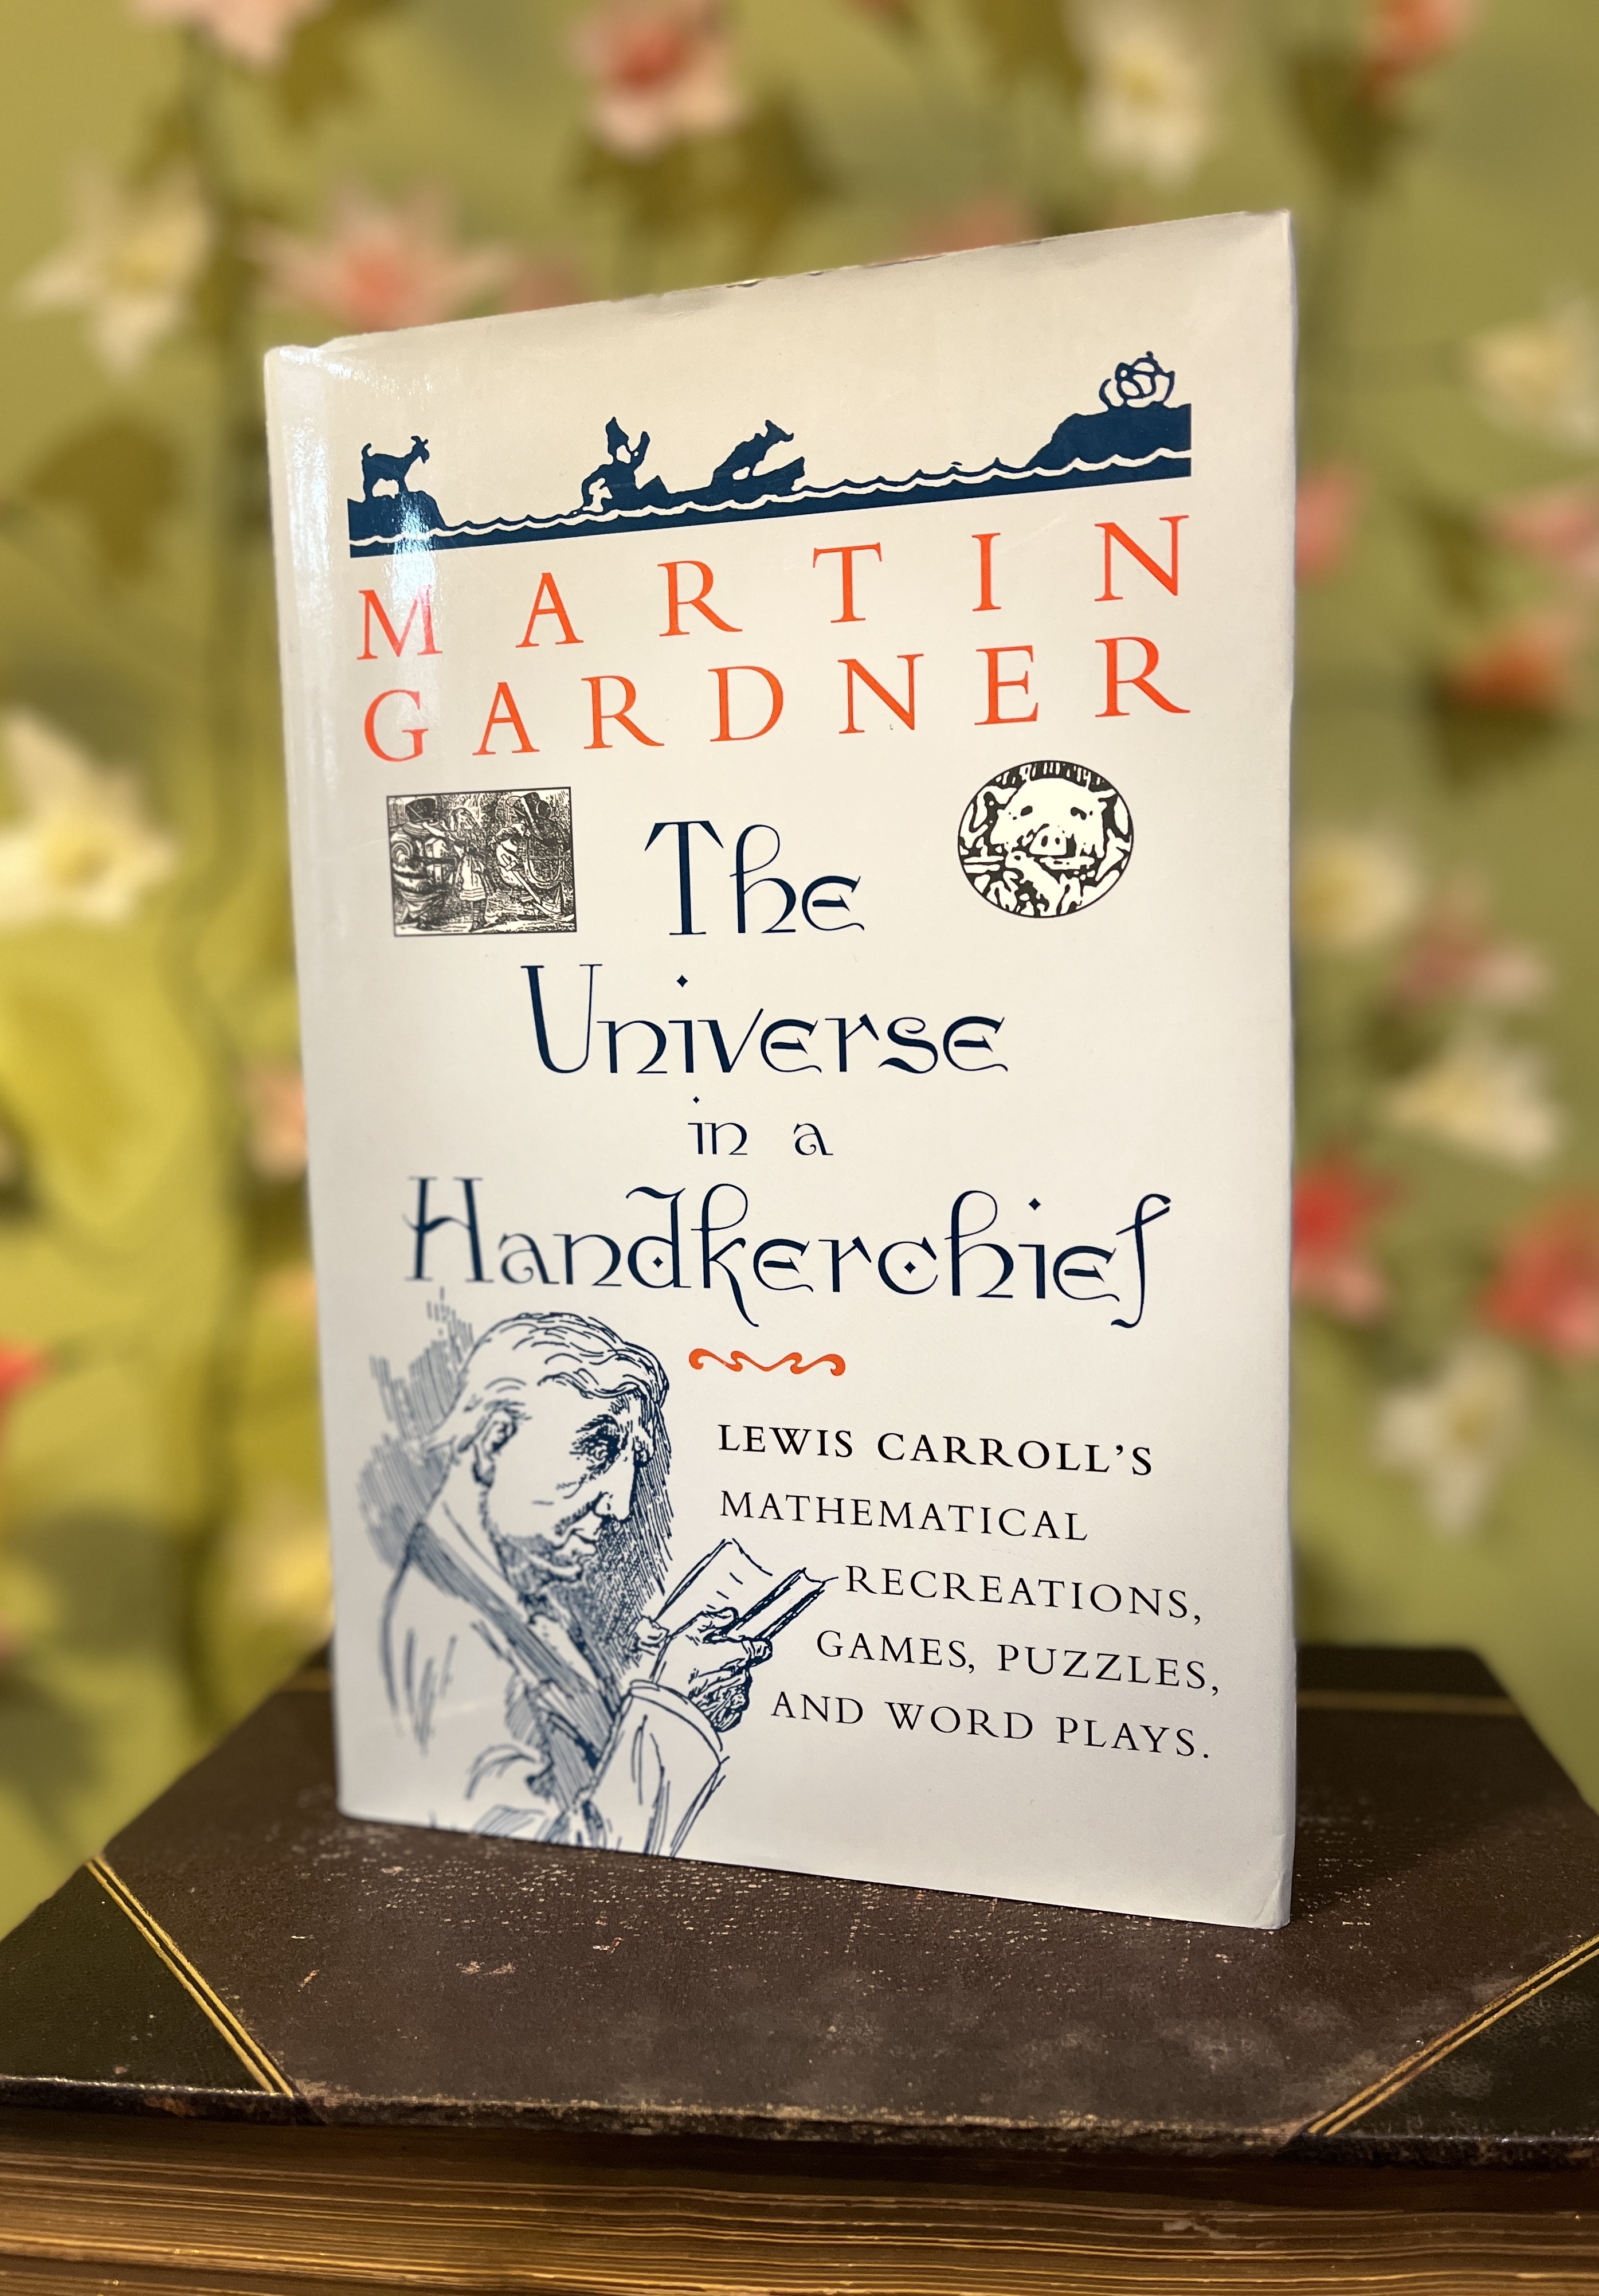 Image for "The Universe in a Handkerchief: Lewis Carroll's Mathematical Recreations, Games, Puzzles, and Word Plays"